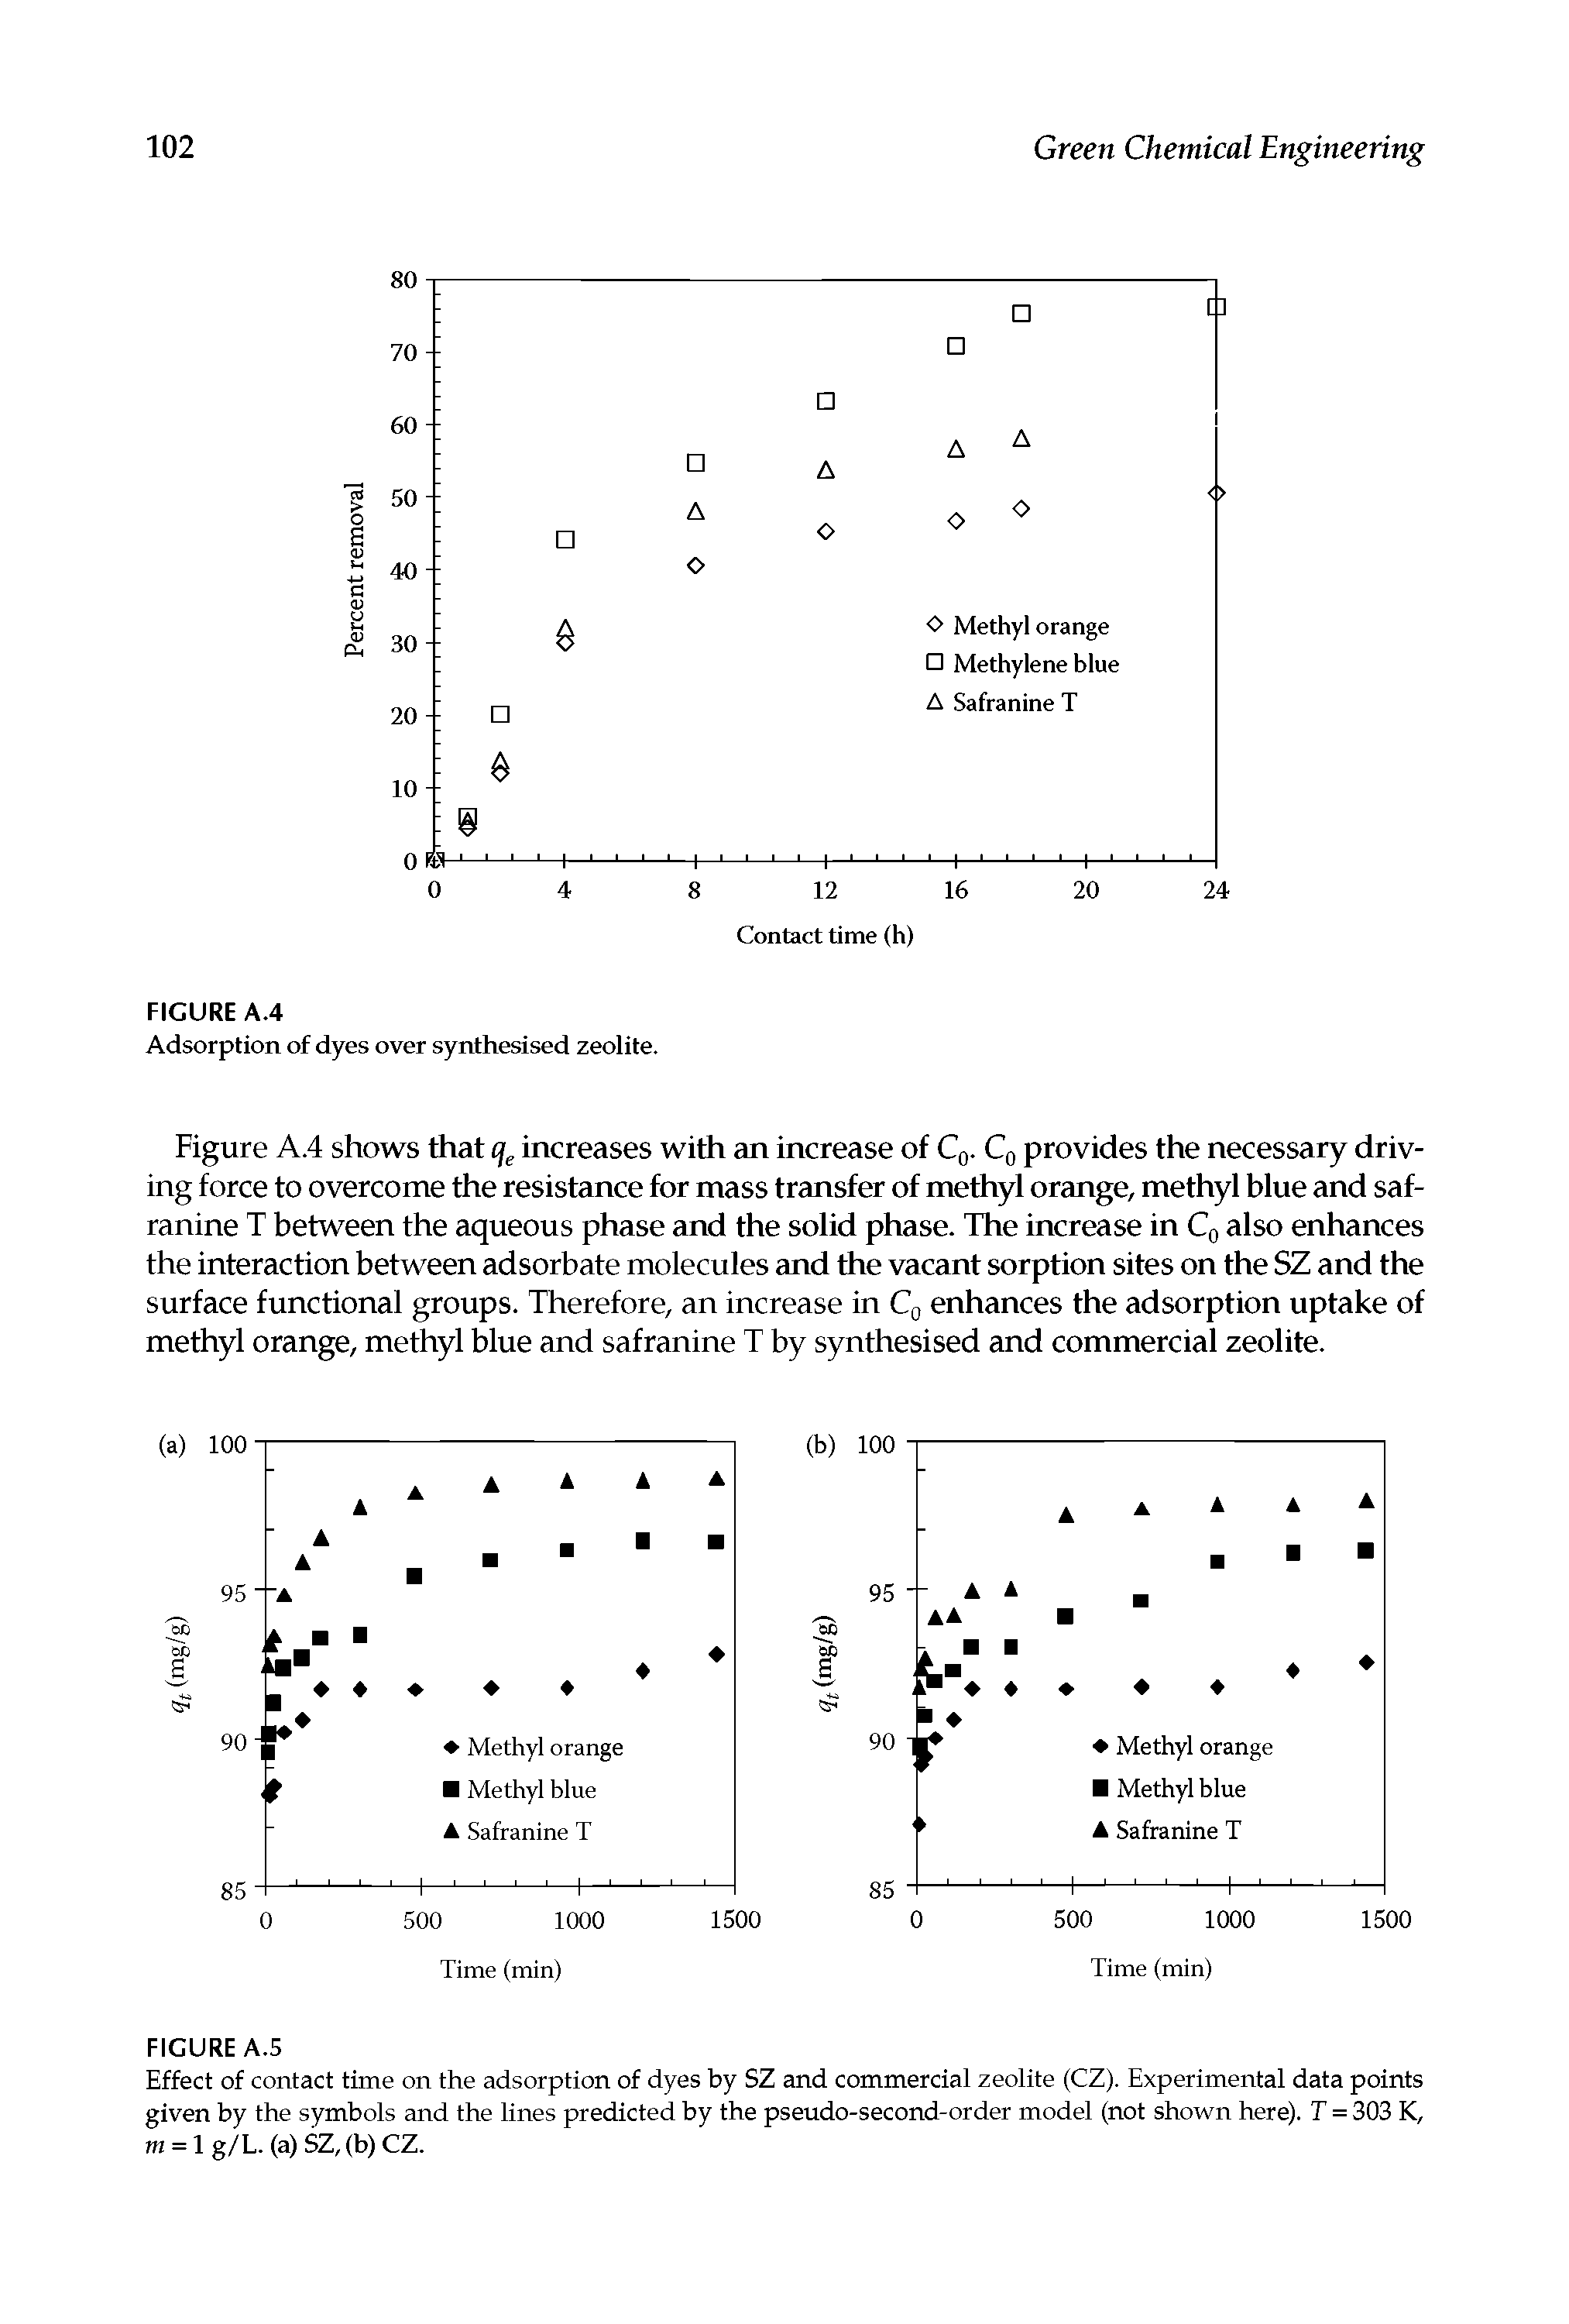 Figure A.4 shows that increases with an increase of Cq- Q provides the necessary driving force to overcome the resistance for mass transfer of methyl orange, methyl blue and safranine T between the aqueous phase and the solid phase. The increase in Q also enhances the interaction between adsorbate molecules and the vacant sorption sites on the SZ and the surface functional groups. Therefore, an increase in Q enhances the adsorption uptake of methyl orange, methyl blue and safranine T by synthesised and commercial zeolite.